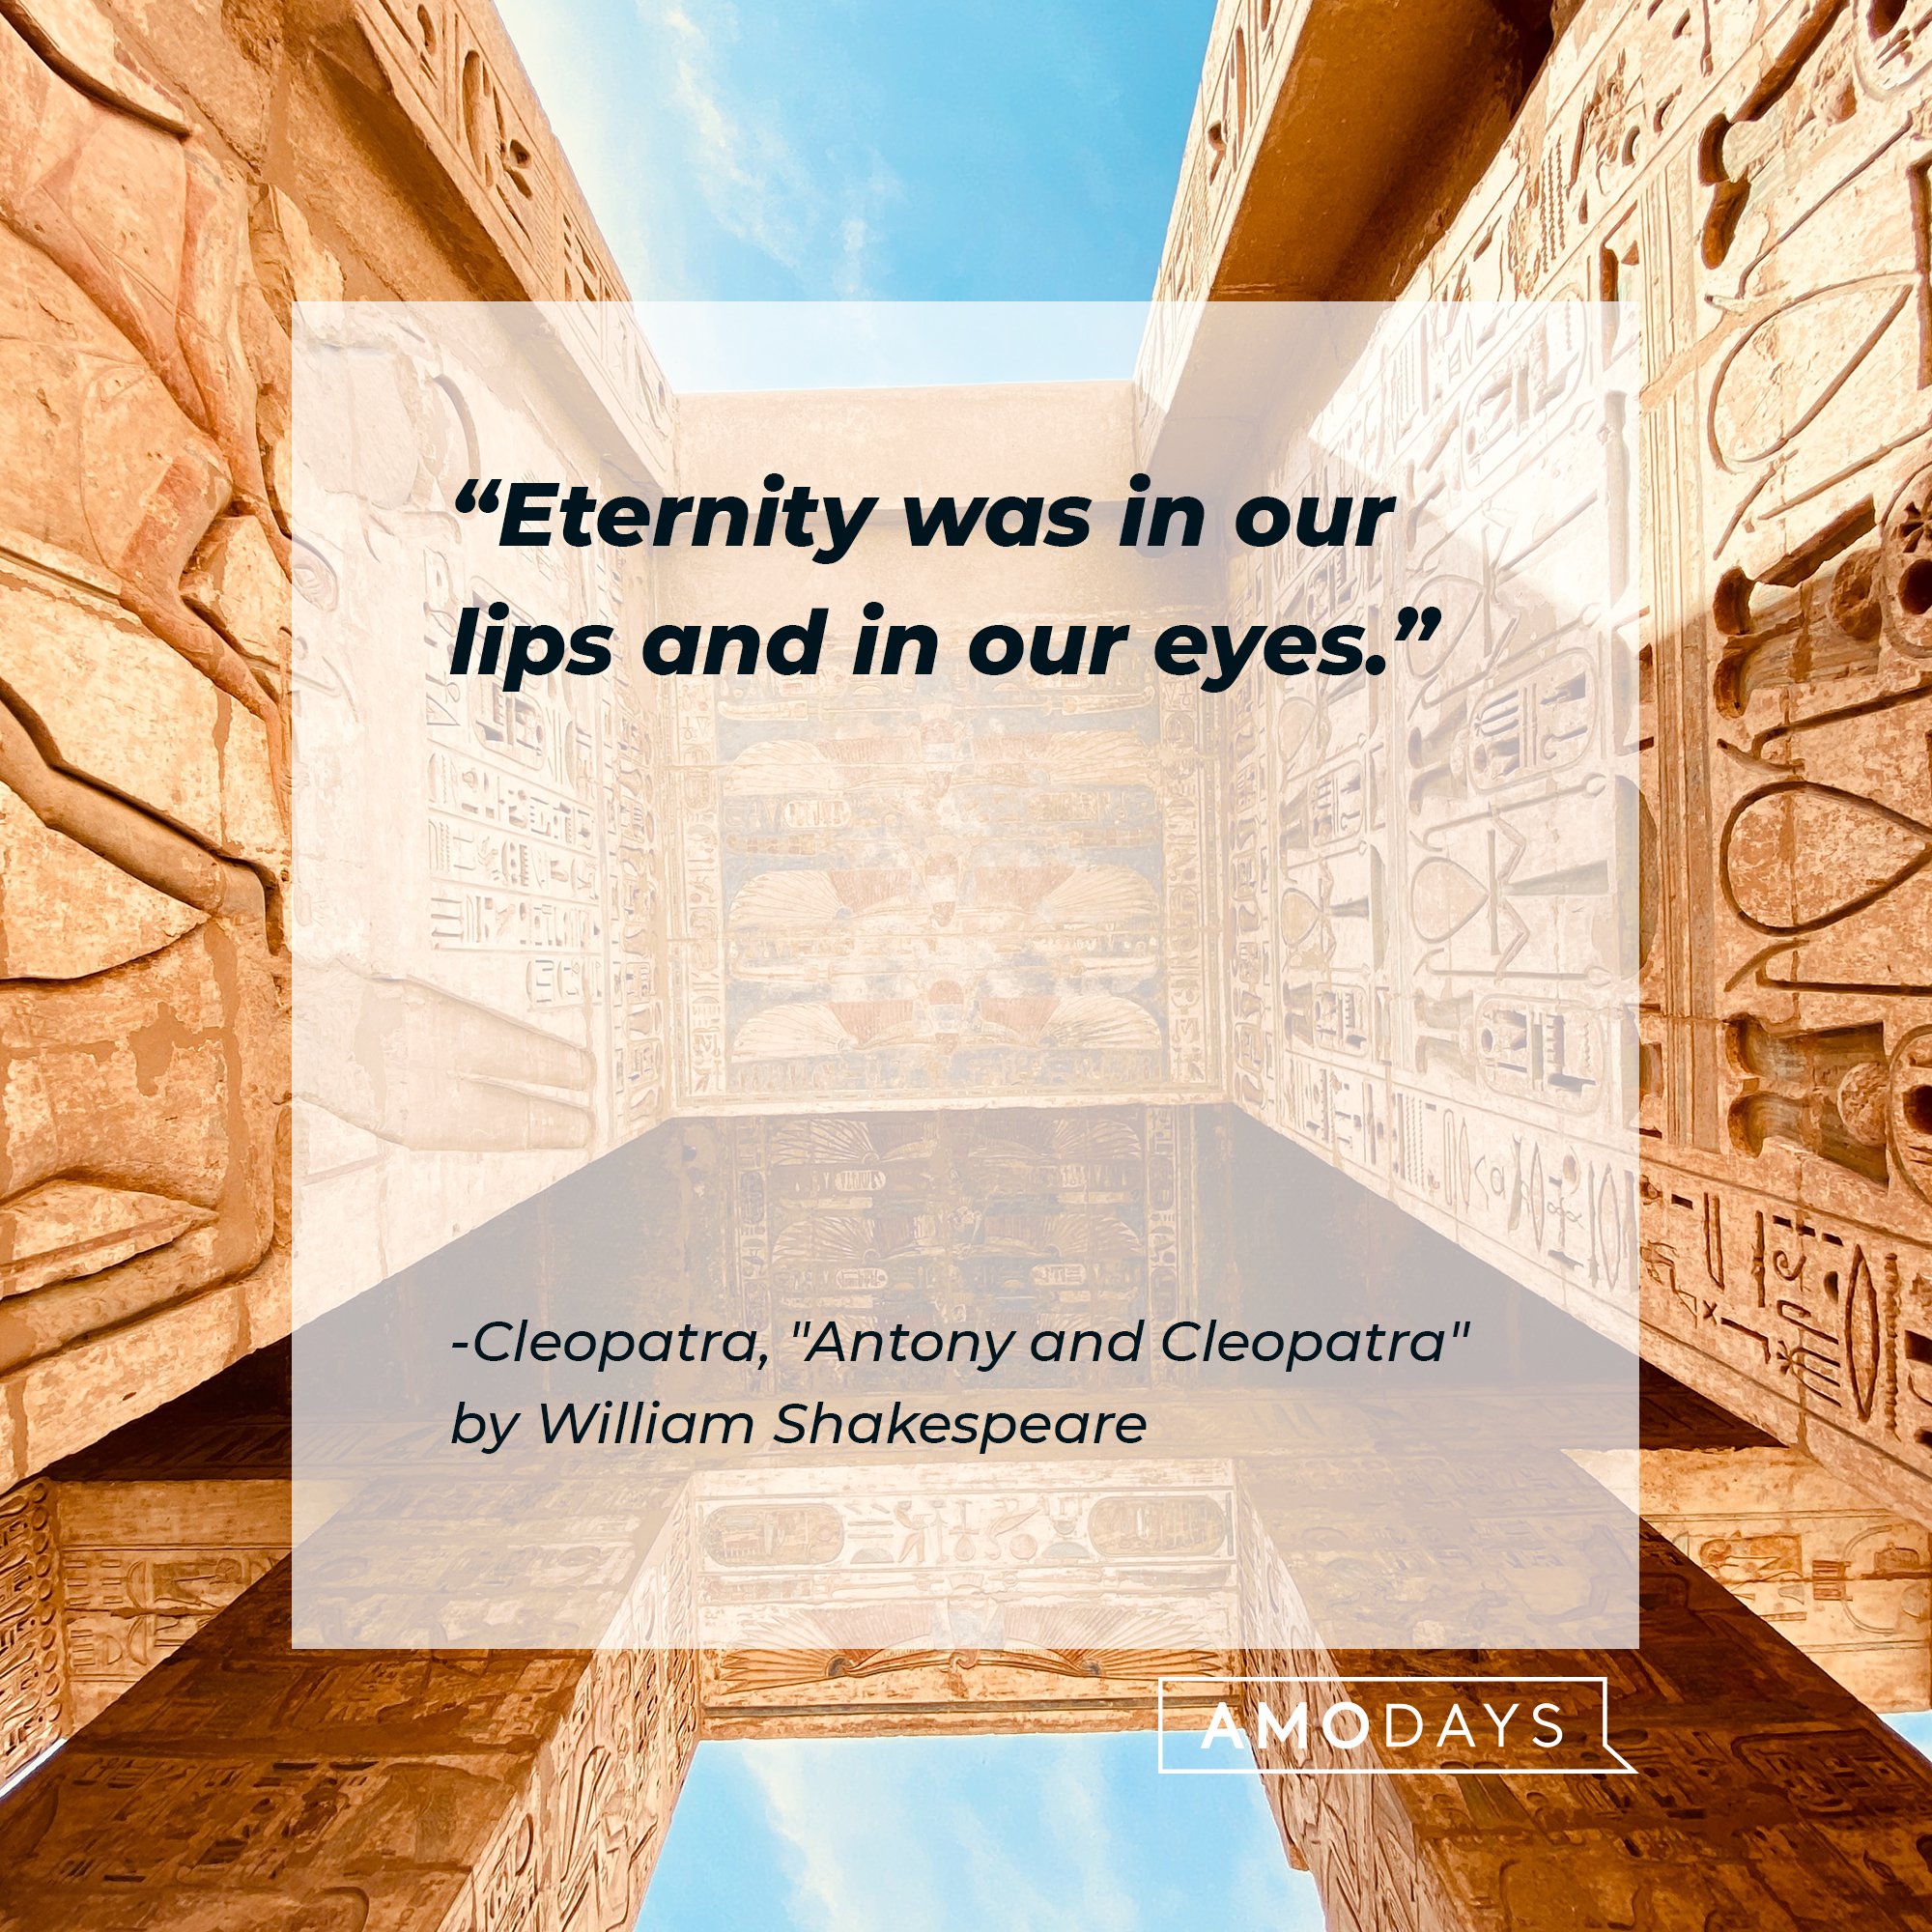  Cleopatra’s quote from "Antony and Cleopatra" by William Shakespeare: "Eternity was in our lips and eyes” | Image: AmoDays